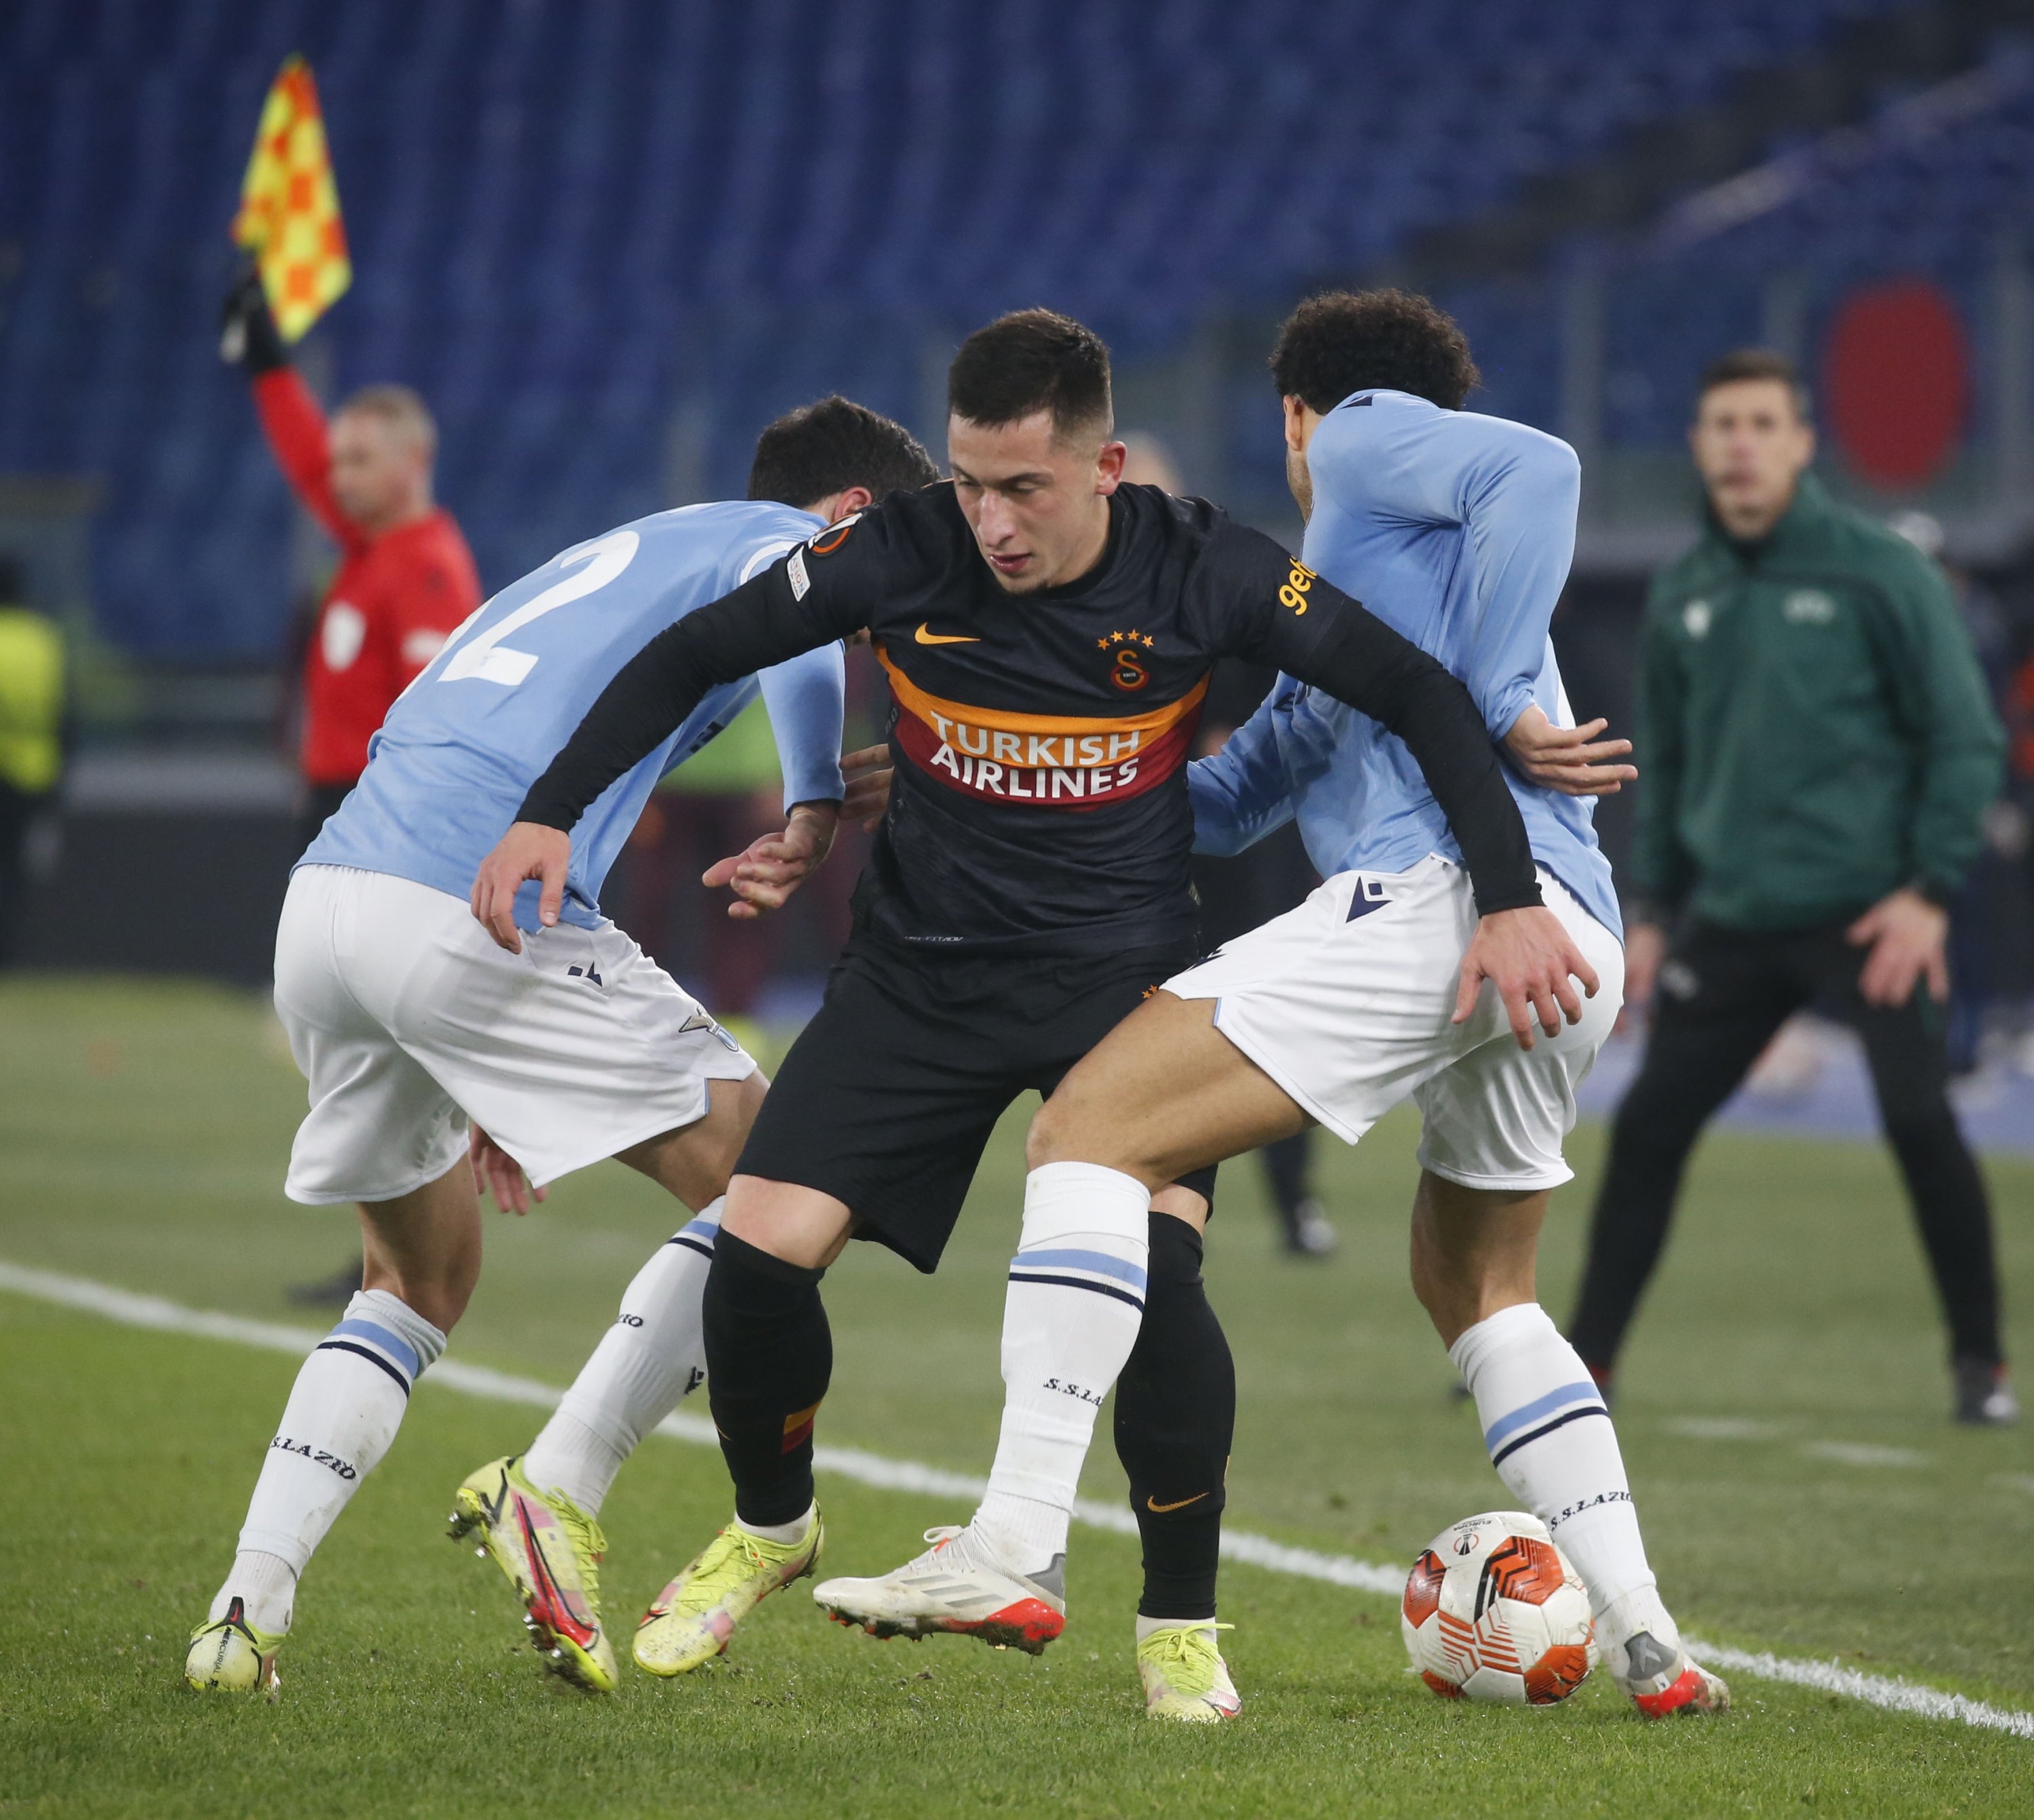 Galatasaray's Olympiu Morutan is seen in action during the UEFA Europa League Group E match between Lazio and Galatasaray at the Stadio Olimpico in Rome, Italy on Dec. 9, 2021 (Reuters Photo)